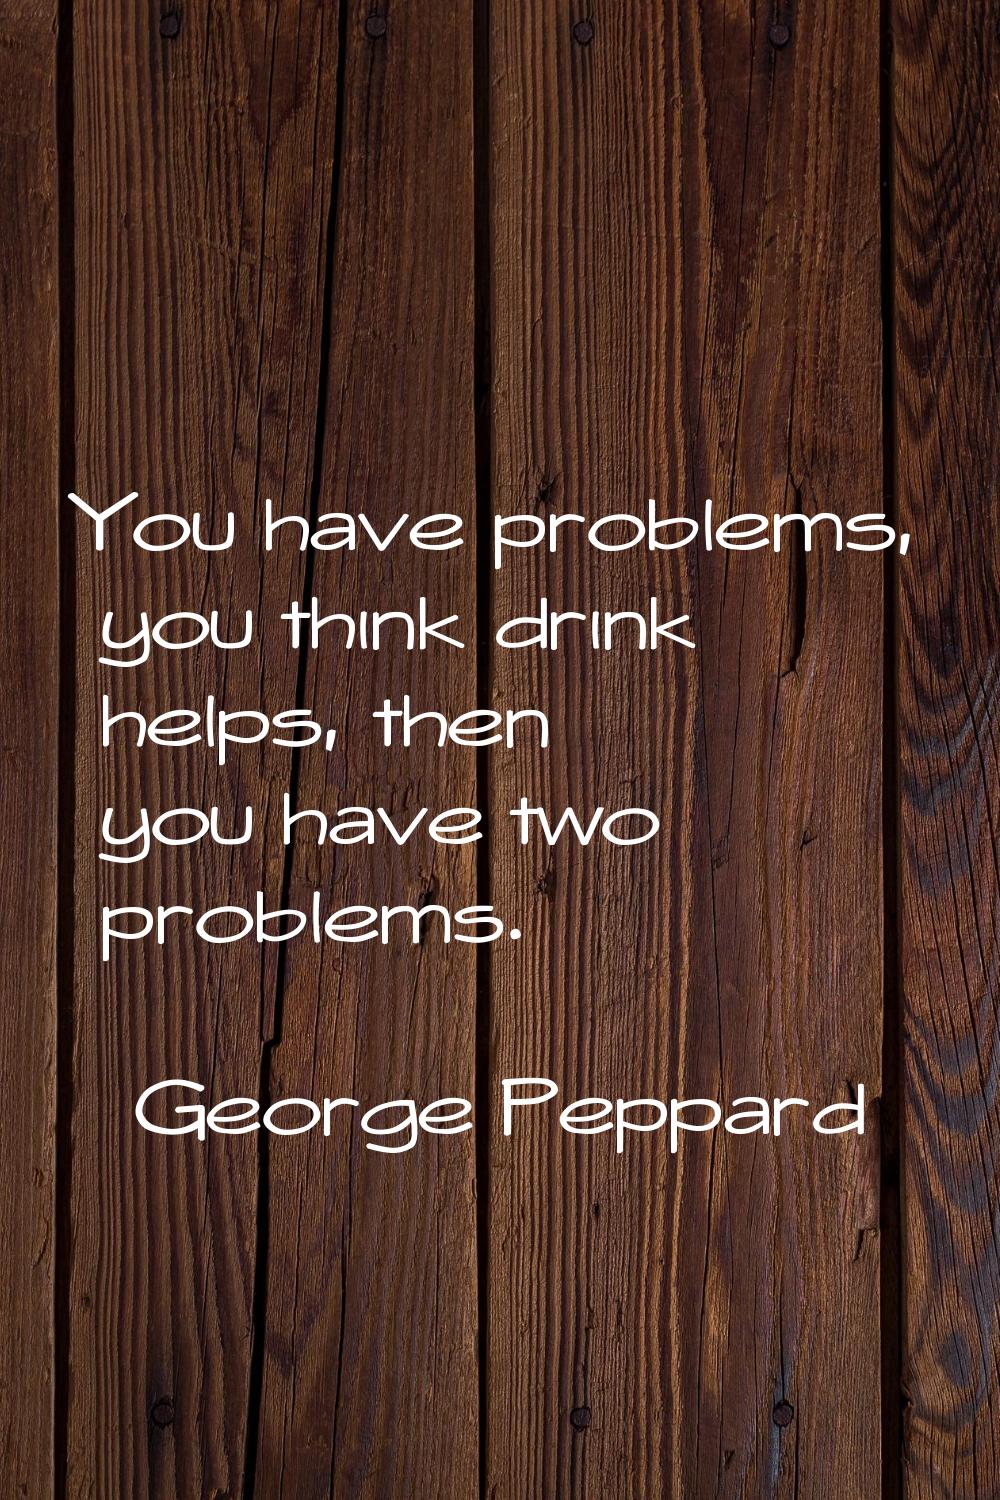 You have problems, you think drink helps, then you have two problems.